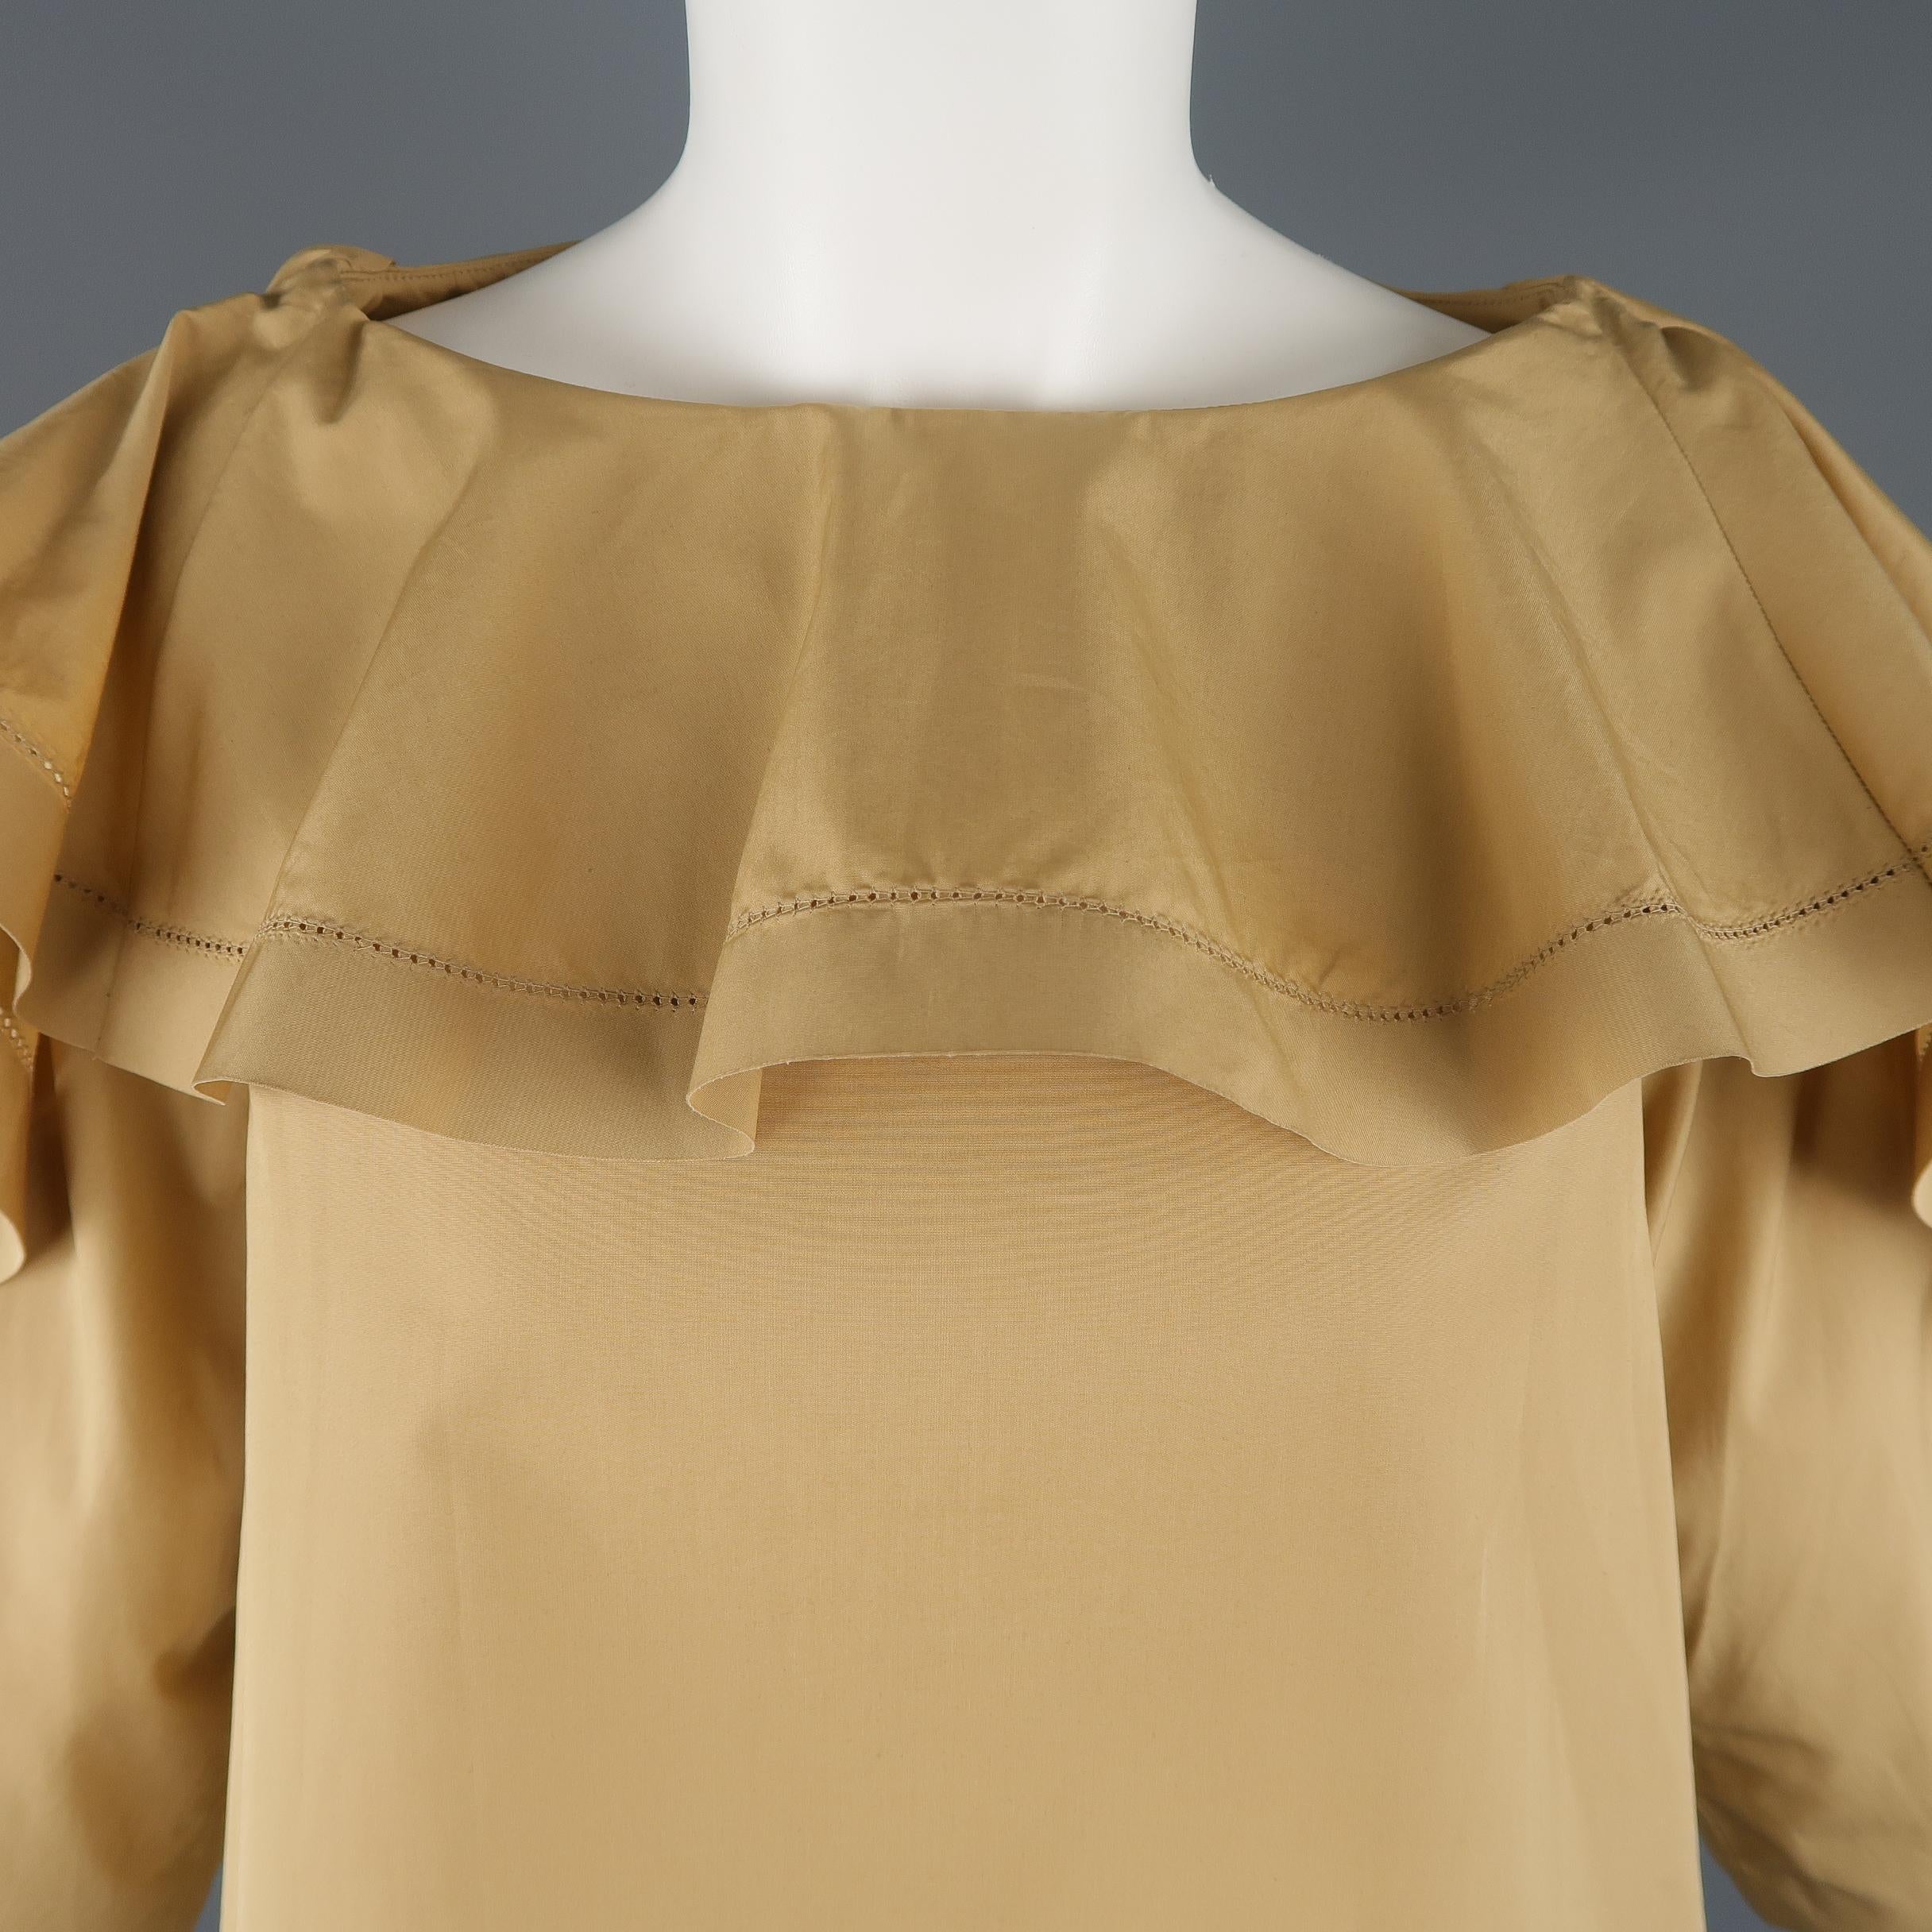 CHLOE blouse comes in a tan beige cotton poplin with a boat neck line, A line silhouette, and wide cropped sleeves with cascading ruffles from the collar down the shoulder.
 
Good Pre-Owned Condition.
Marked: FR 34
 
Measurements:
 
Shoulder: 13